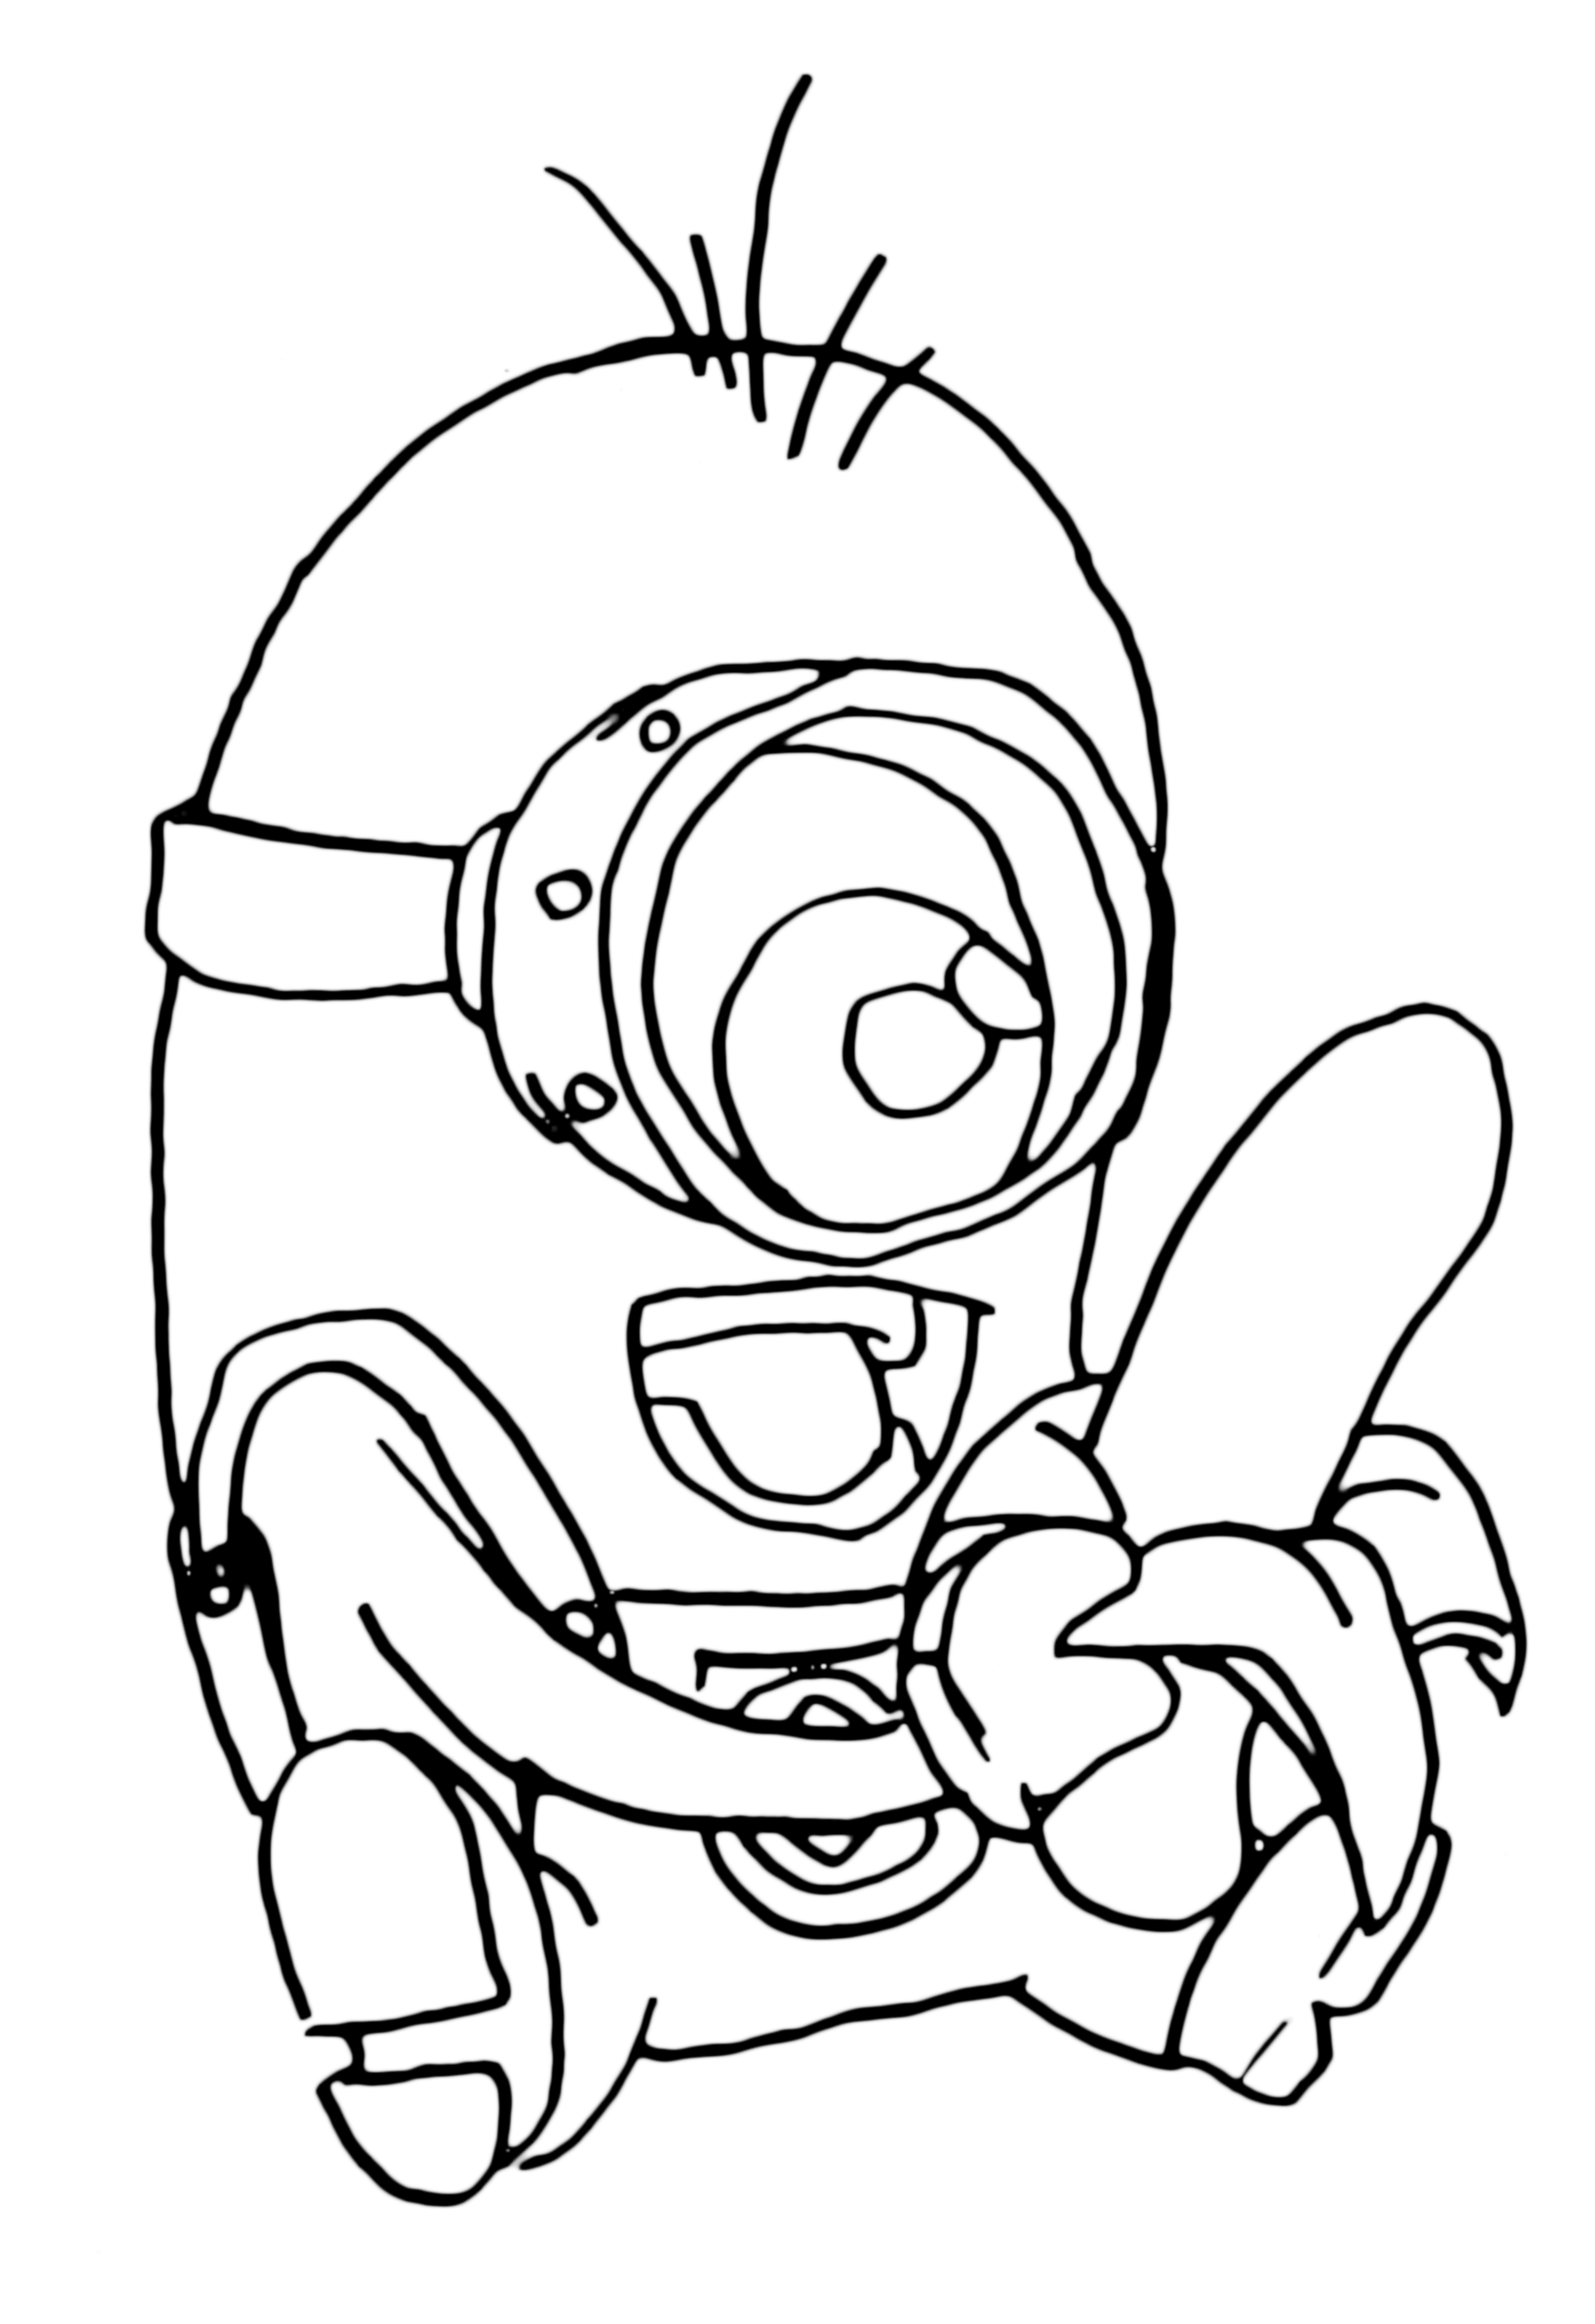 9 Pics of Kevin The Minion Coloring Pages - Despicable Me Drawing ...